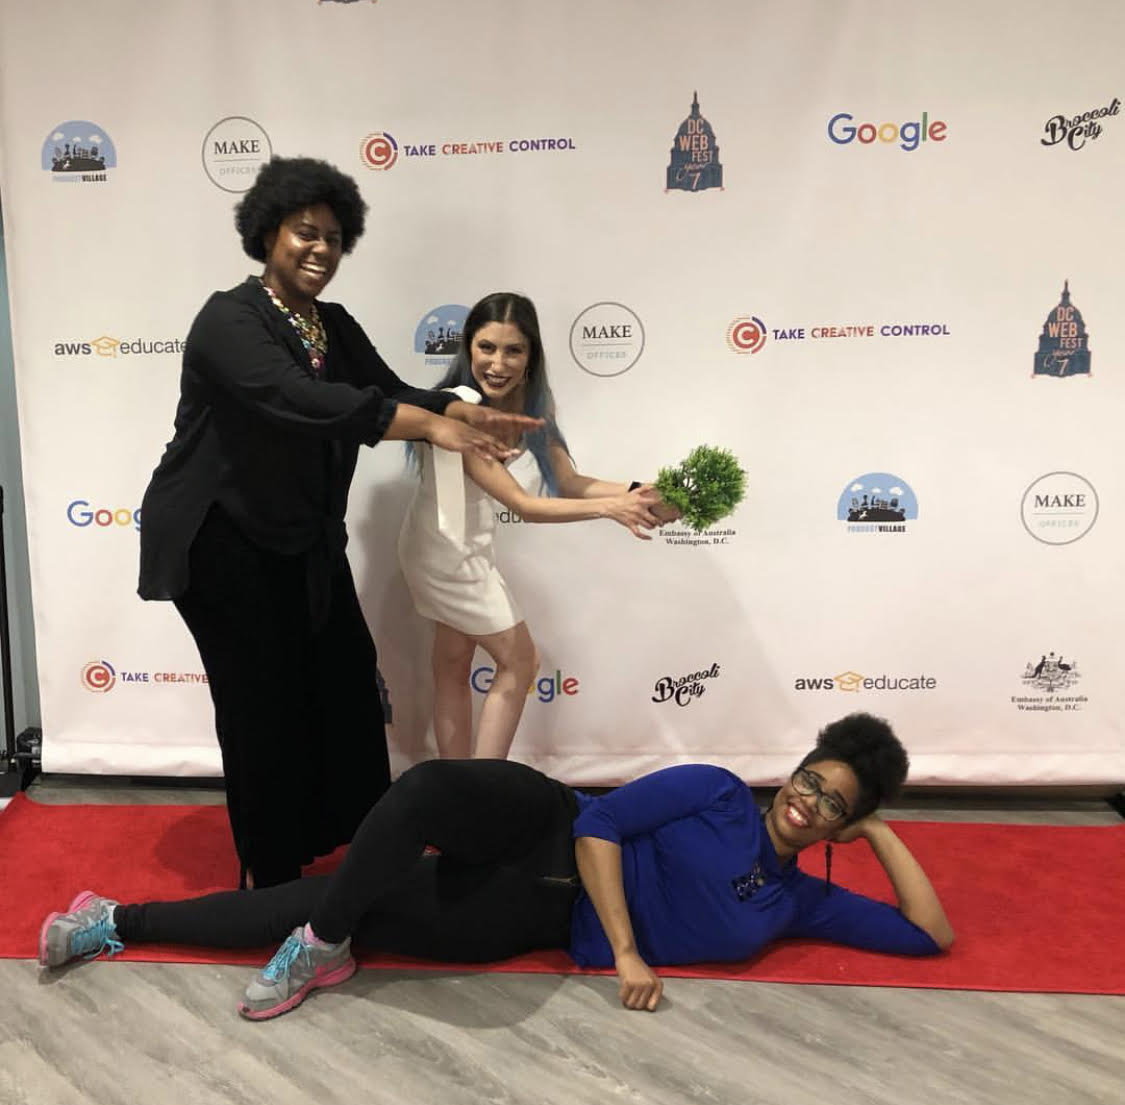  Credit:  @diana_arlana  When&nbsp; @dcwebfest &nbsp;is over, we be like....🏾🤣 I had the BEST time! This has DEFINITELY been my favorite web fest yet. I’ve never worked with a team of so many incredible people. I’m overwhelmed with joy....and adren